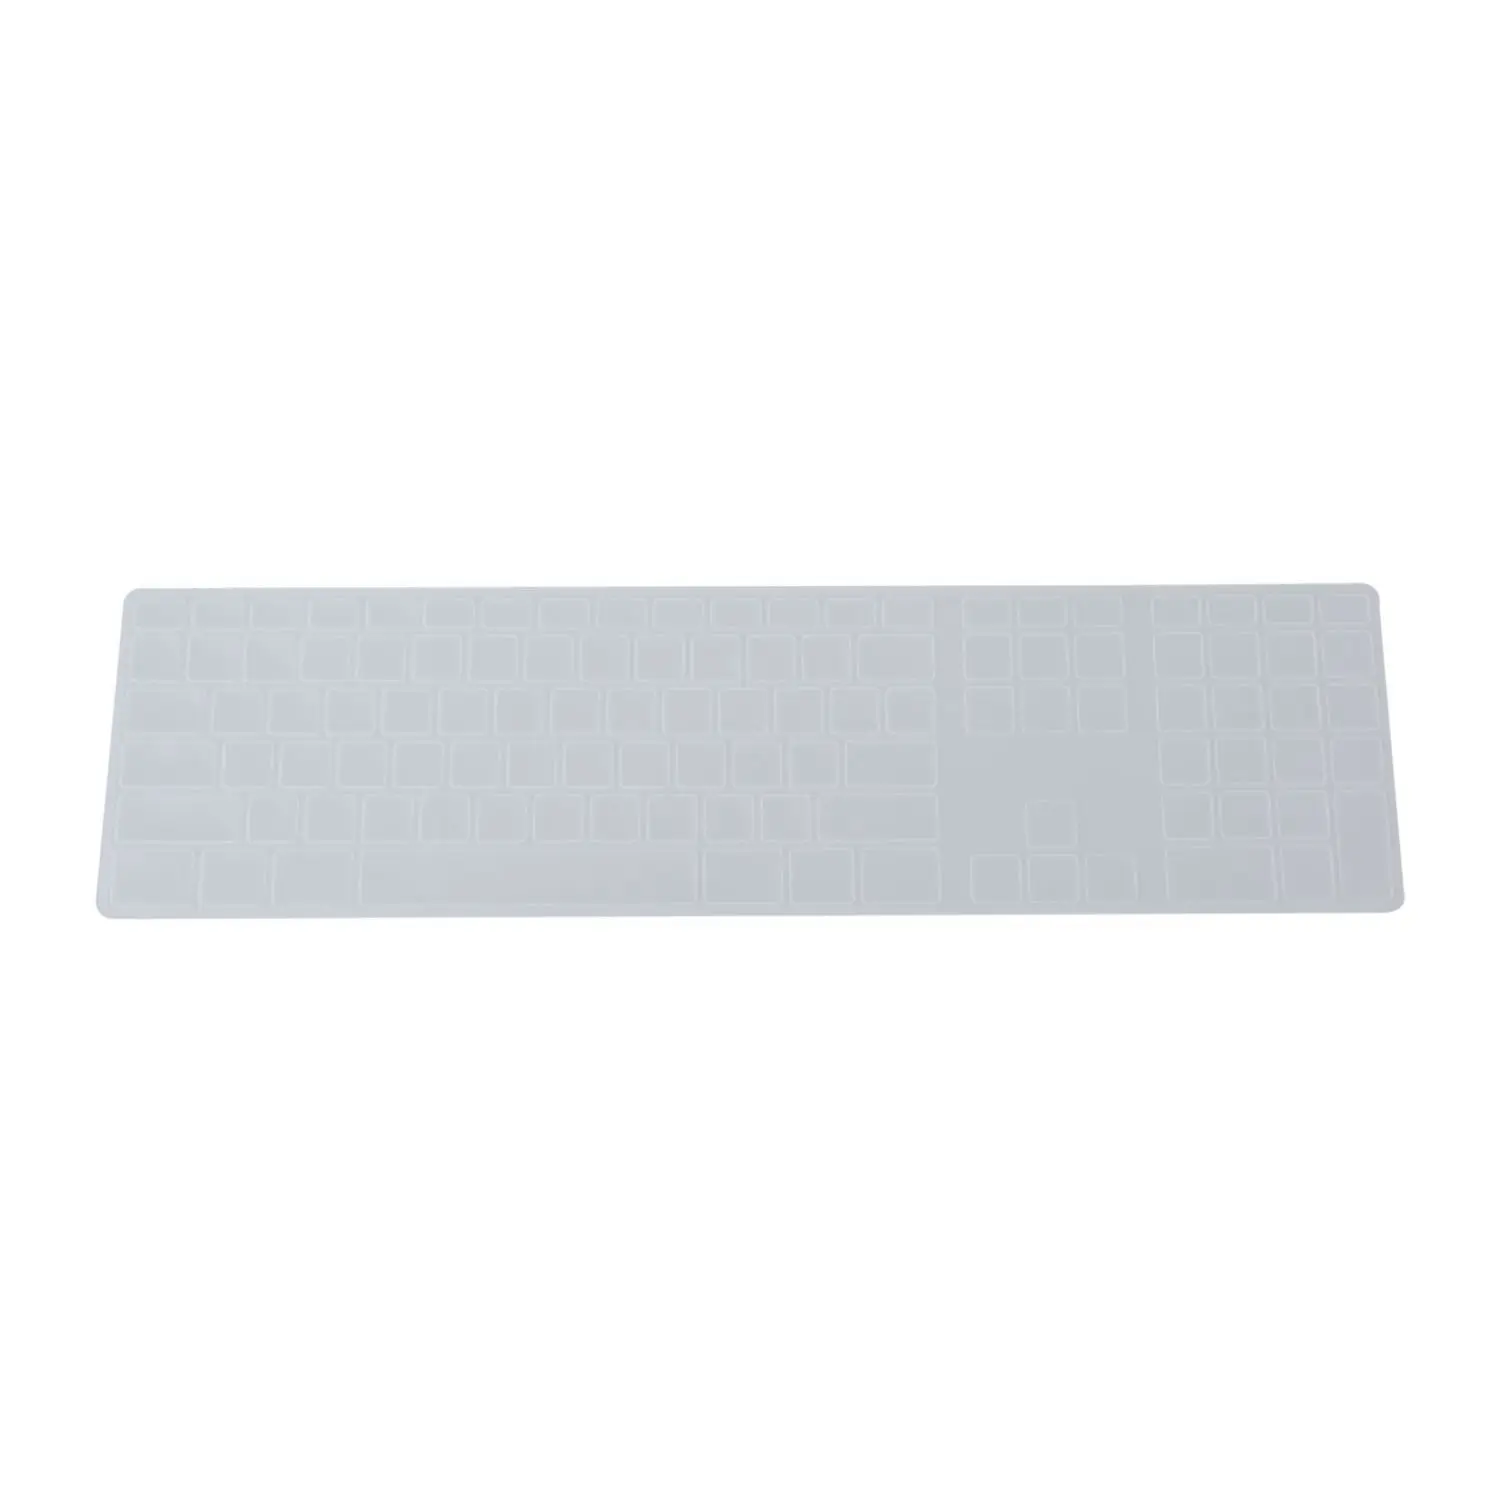 

Silicone Thin Keyboard Skin Cover Protector With Numeric Keypad For Apple iMac Transparent